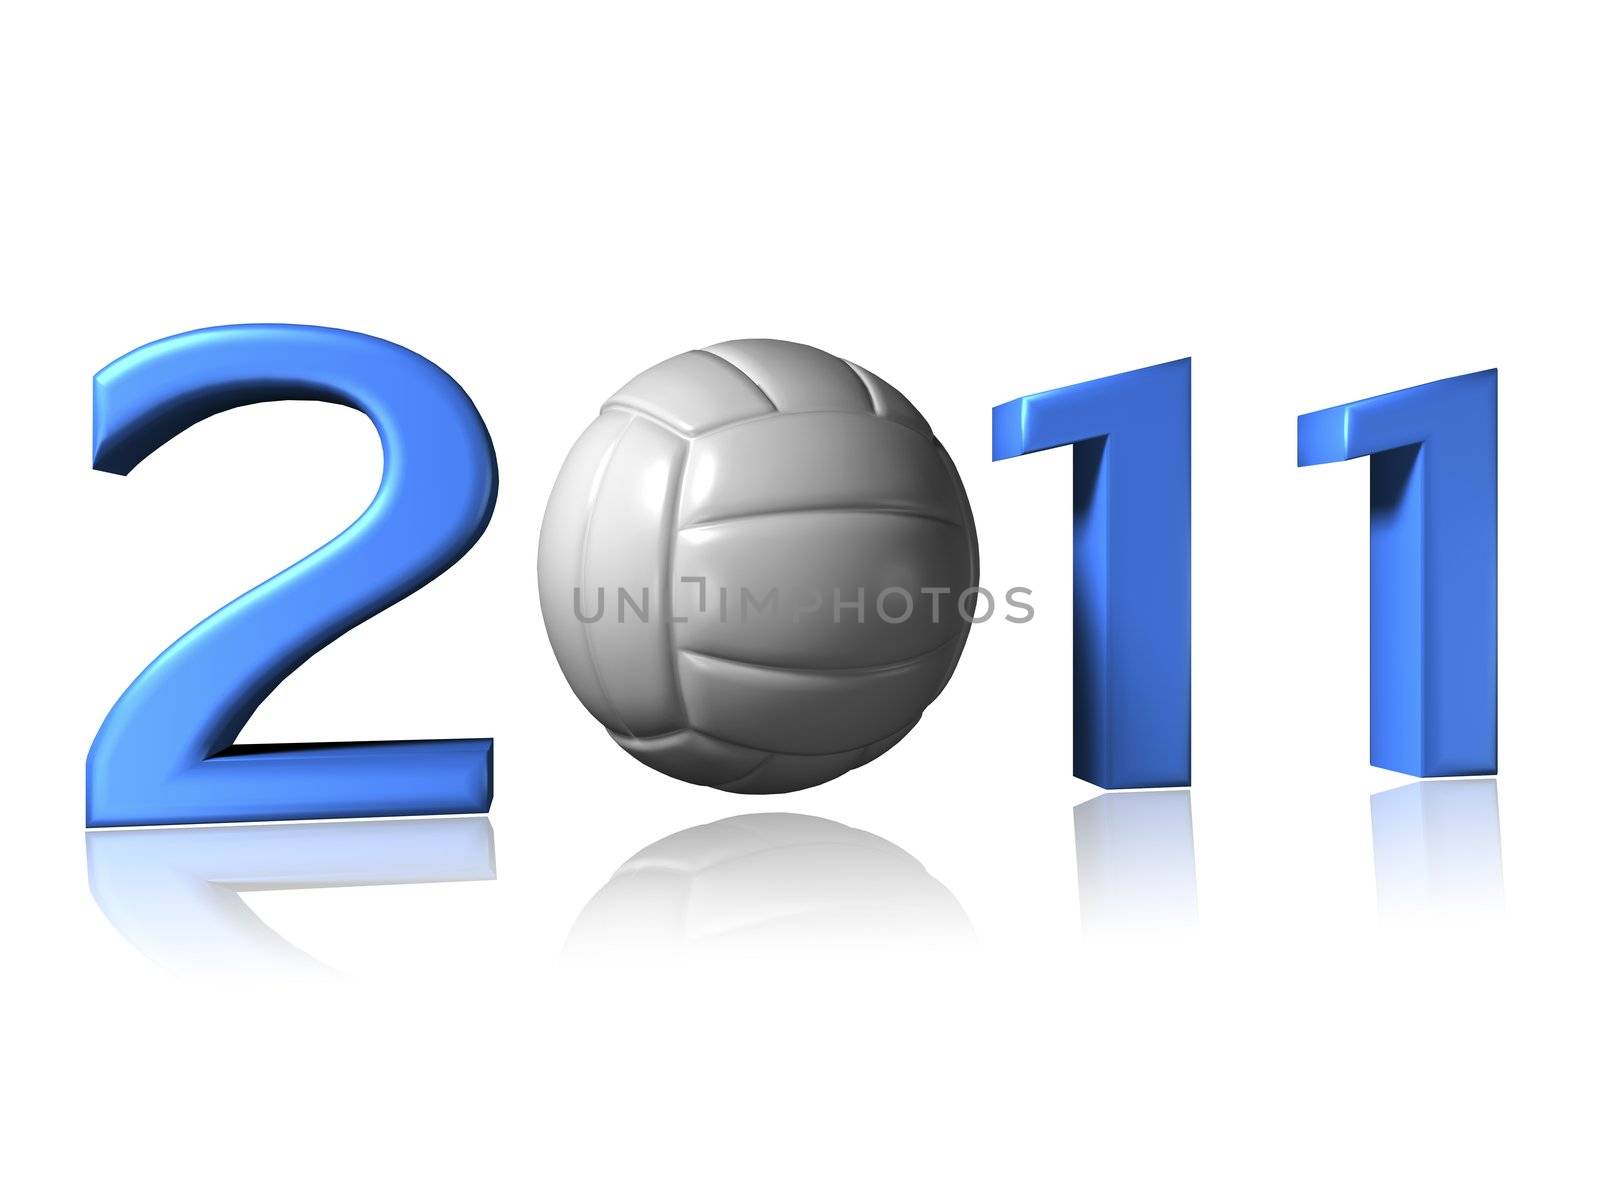 Big 2011 volley logo on a white background